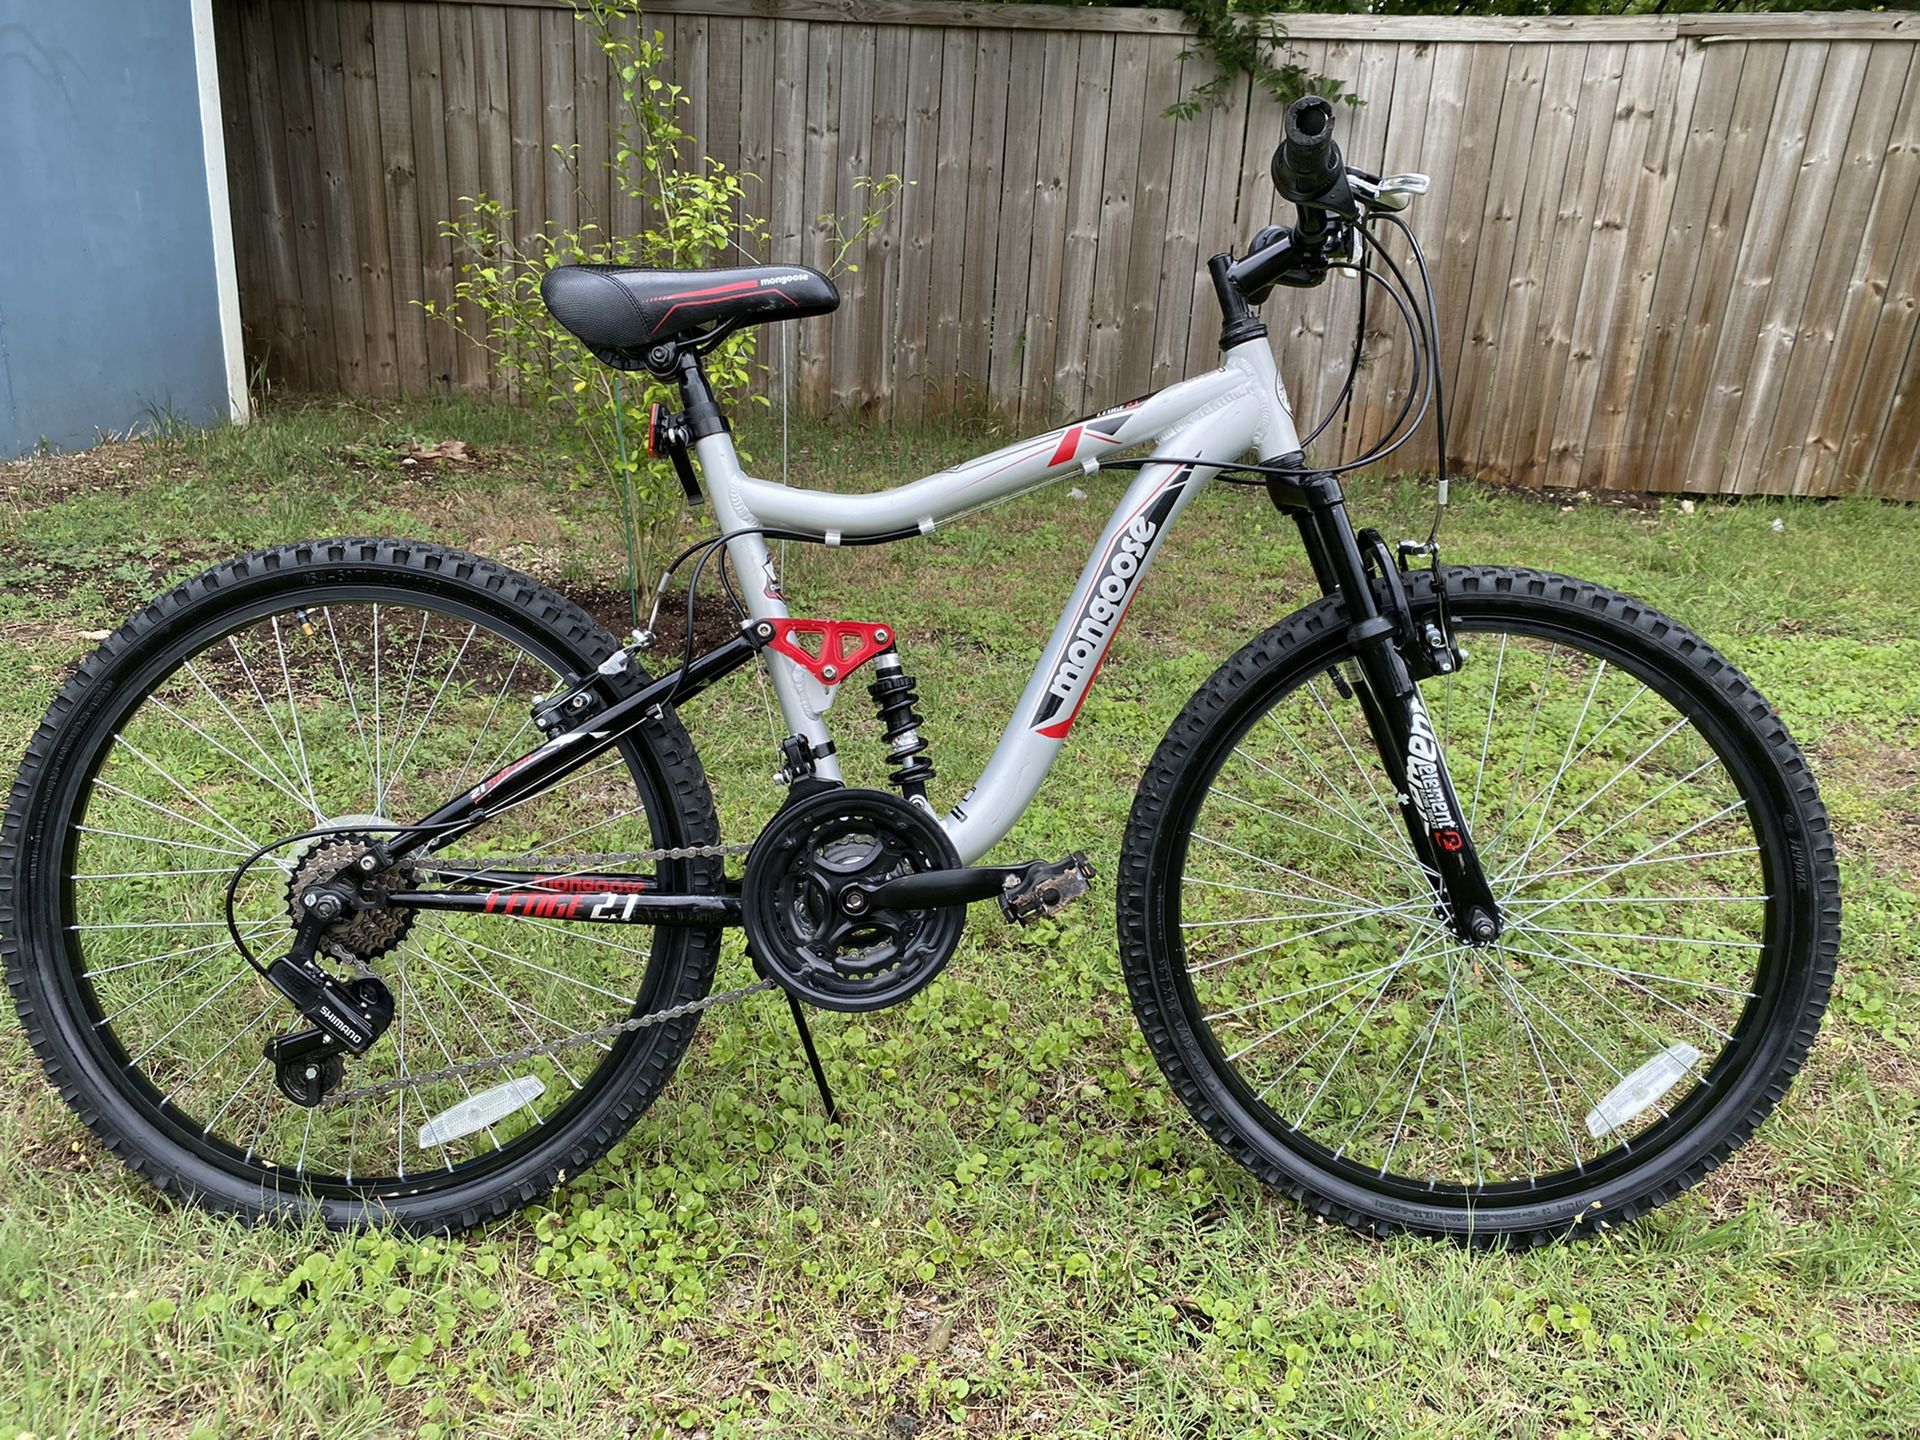 Mongoose Ledge 2.1 Mountain Bike, 24-inch wheels, 21 speeds, boys frame , Silver/Red. .Best offer. Very clean ready to ride.